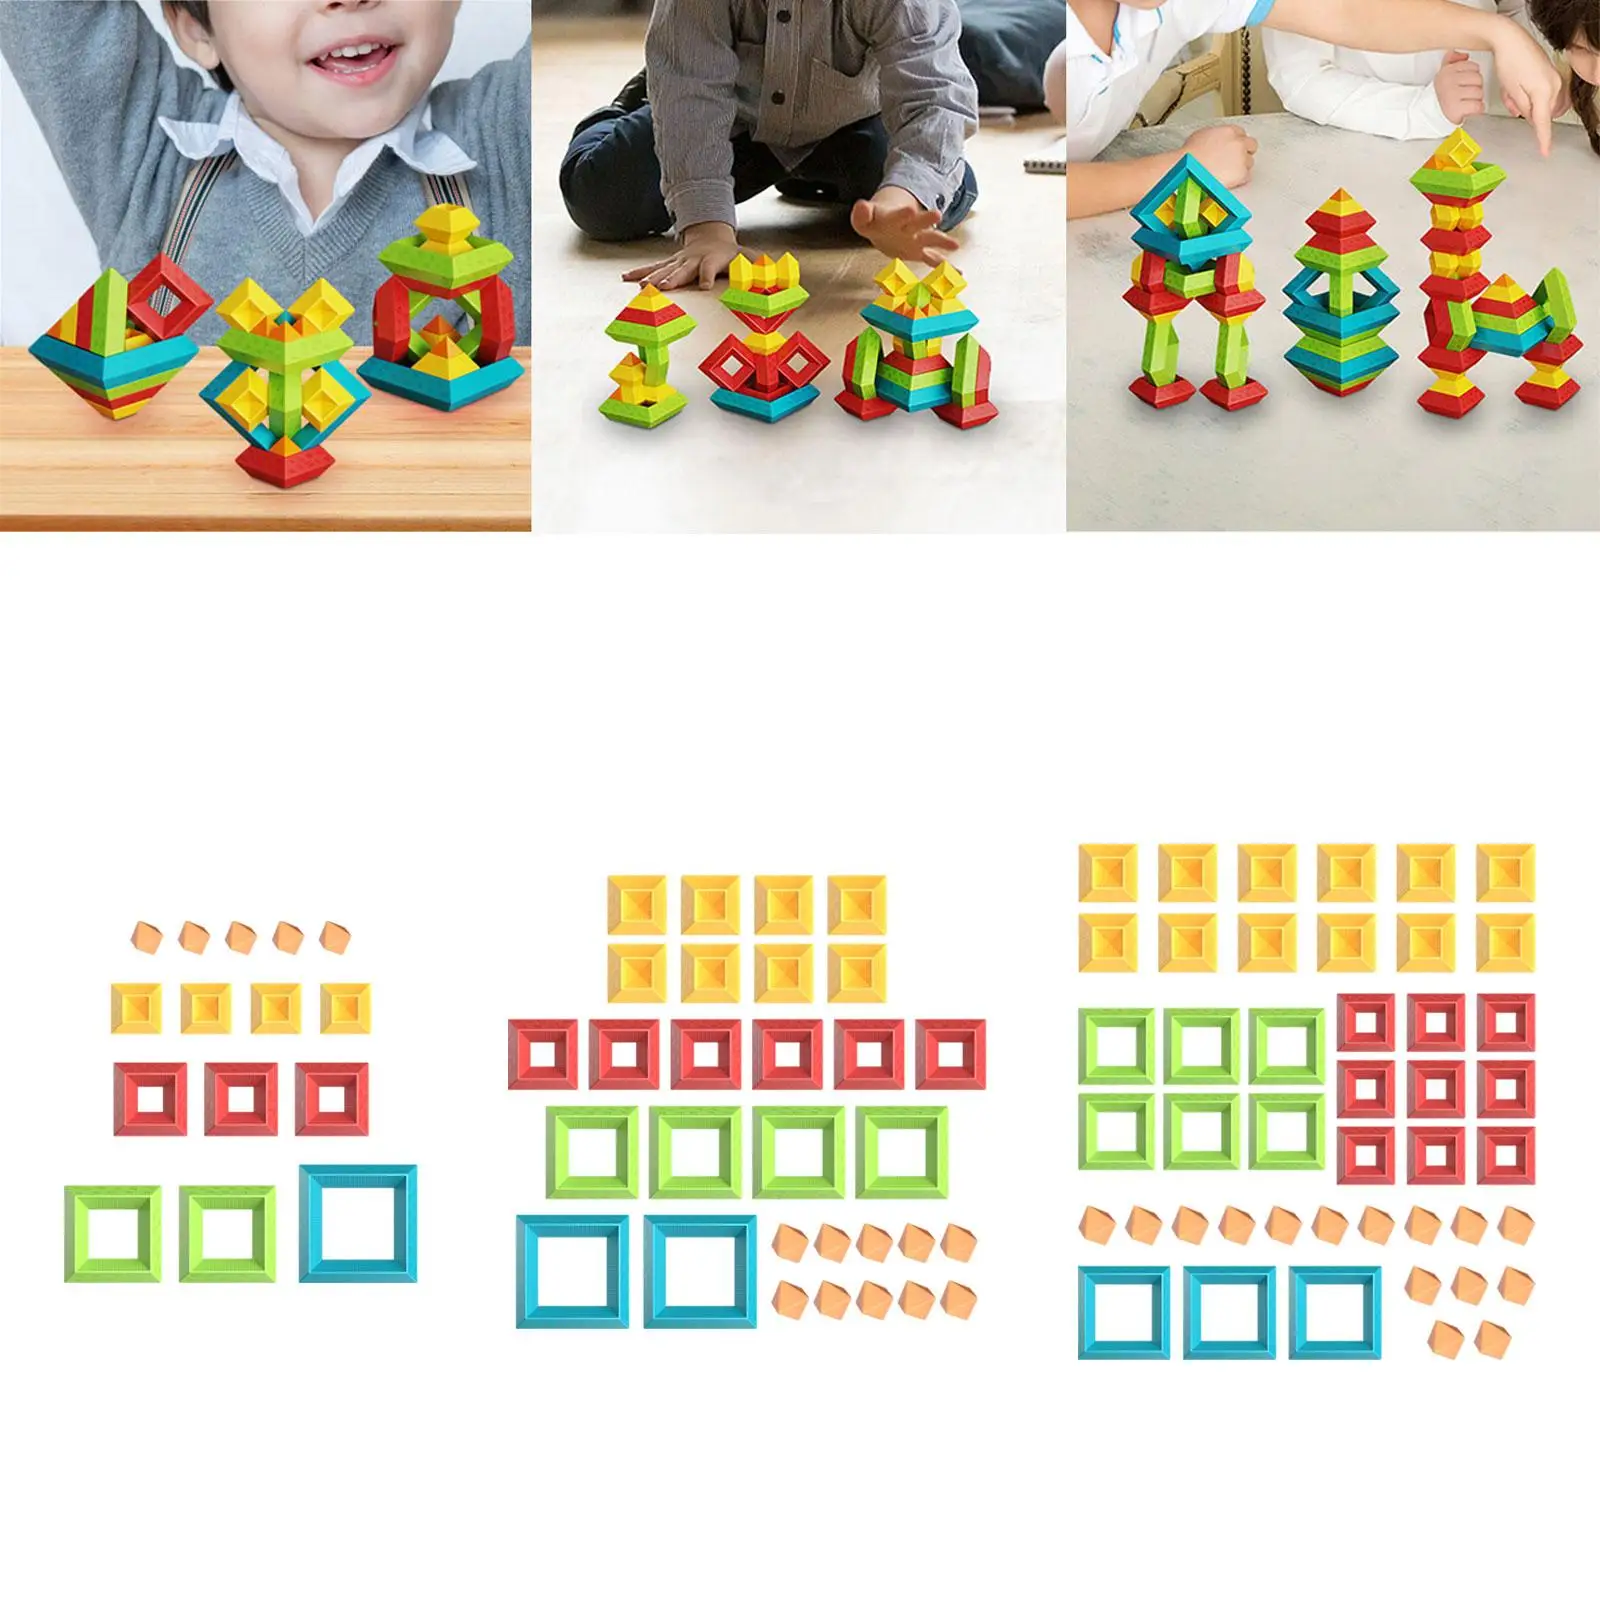 Stacking Blocks Learning Activities Stocking Stuffers Sensory Baby Stacking Toys for Boy Girls Children Toddlers Kids